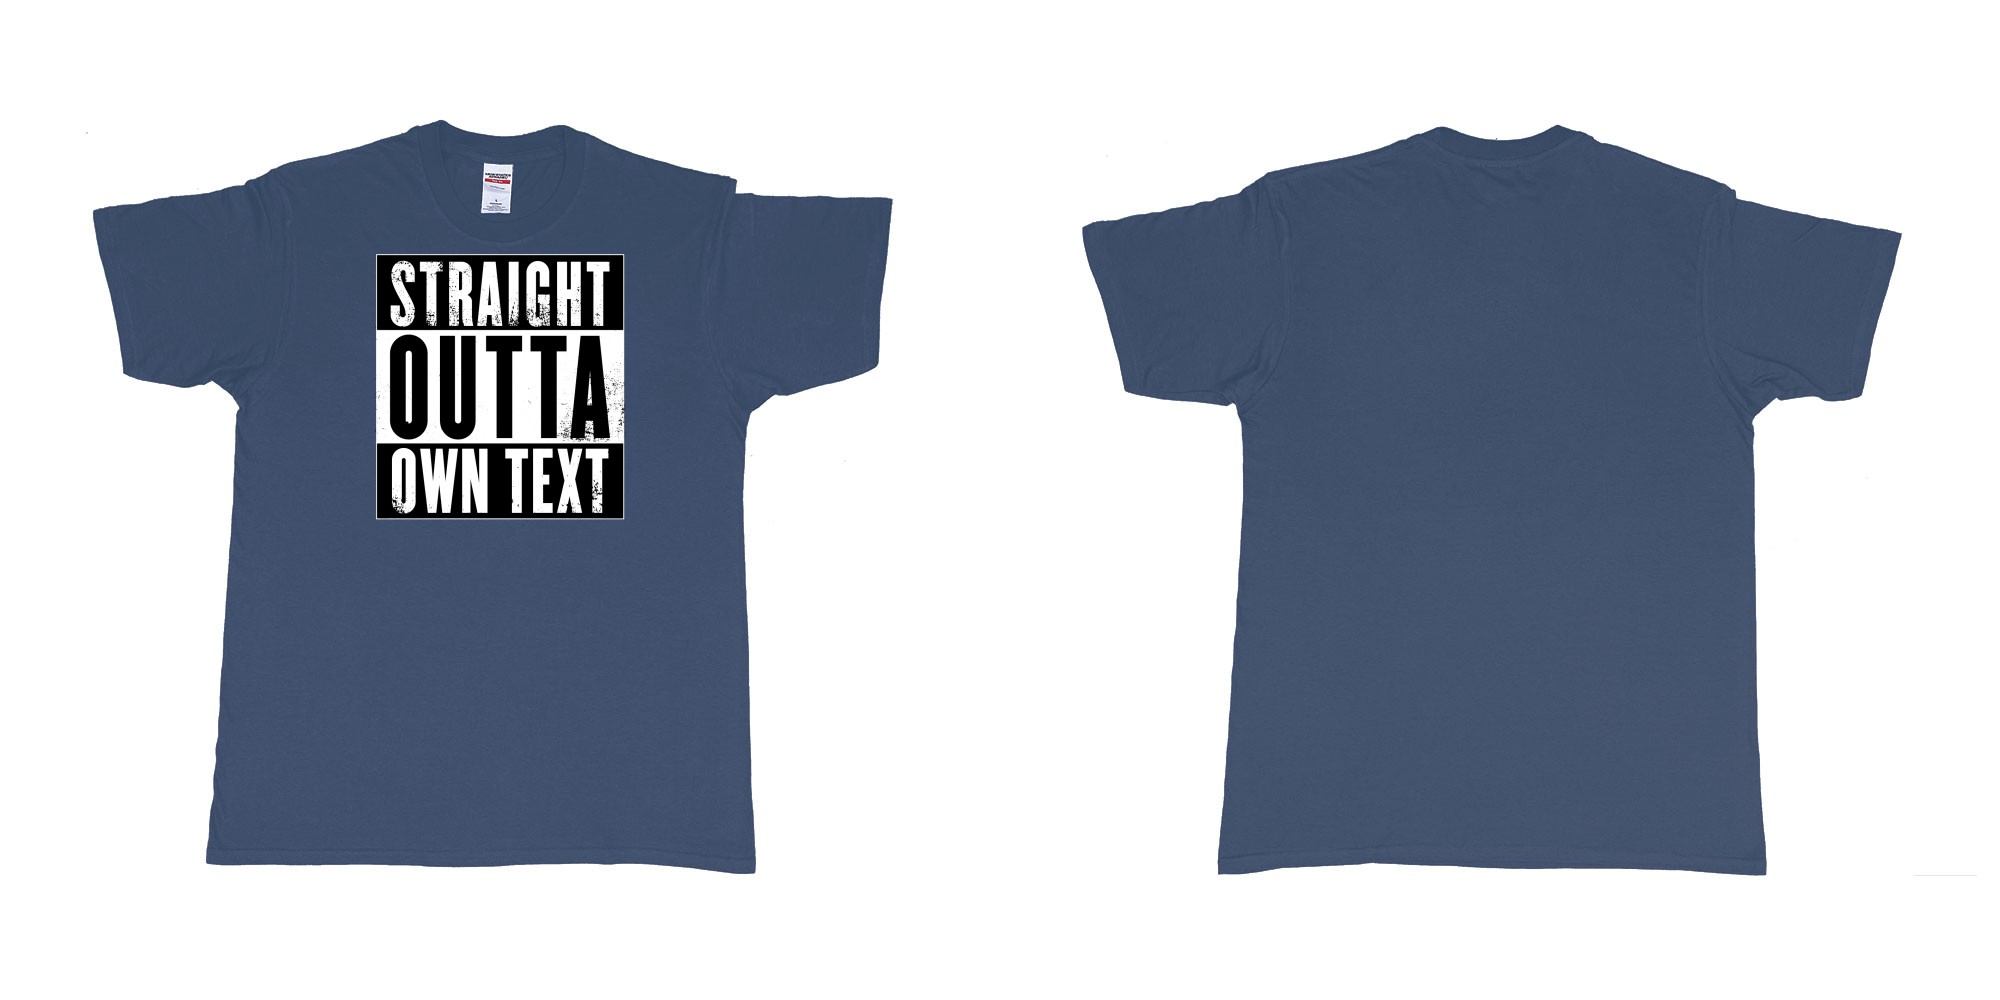 Custom tshirt design Straight Outta Compton in fabric color navy choice your own text made in Bali by The Pirate Way